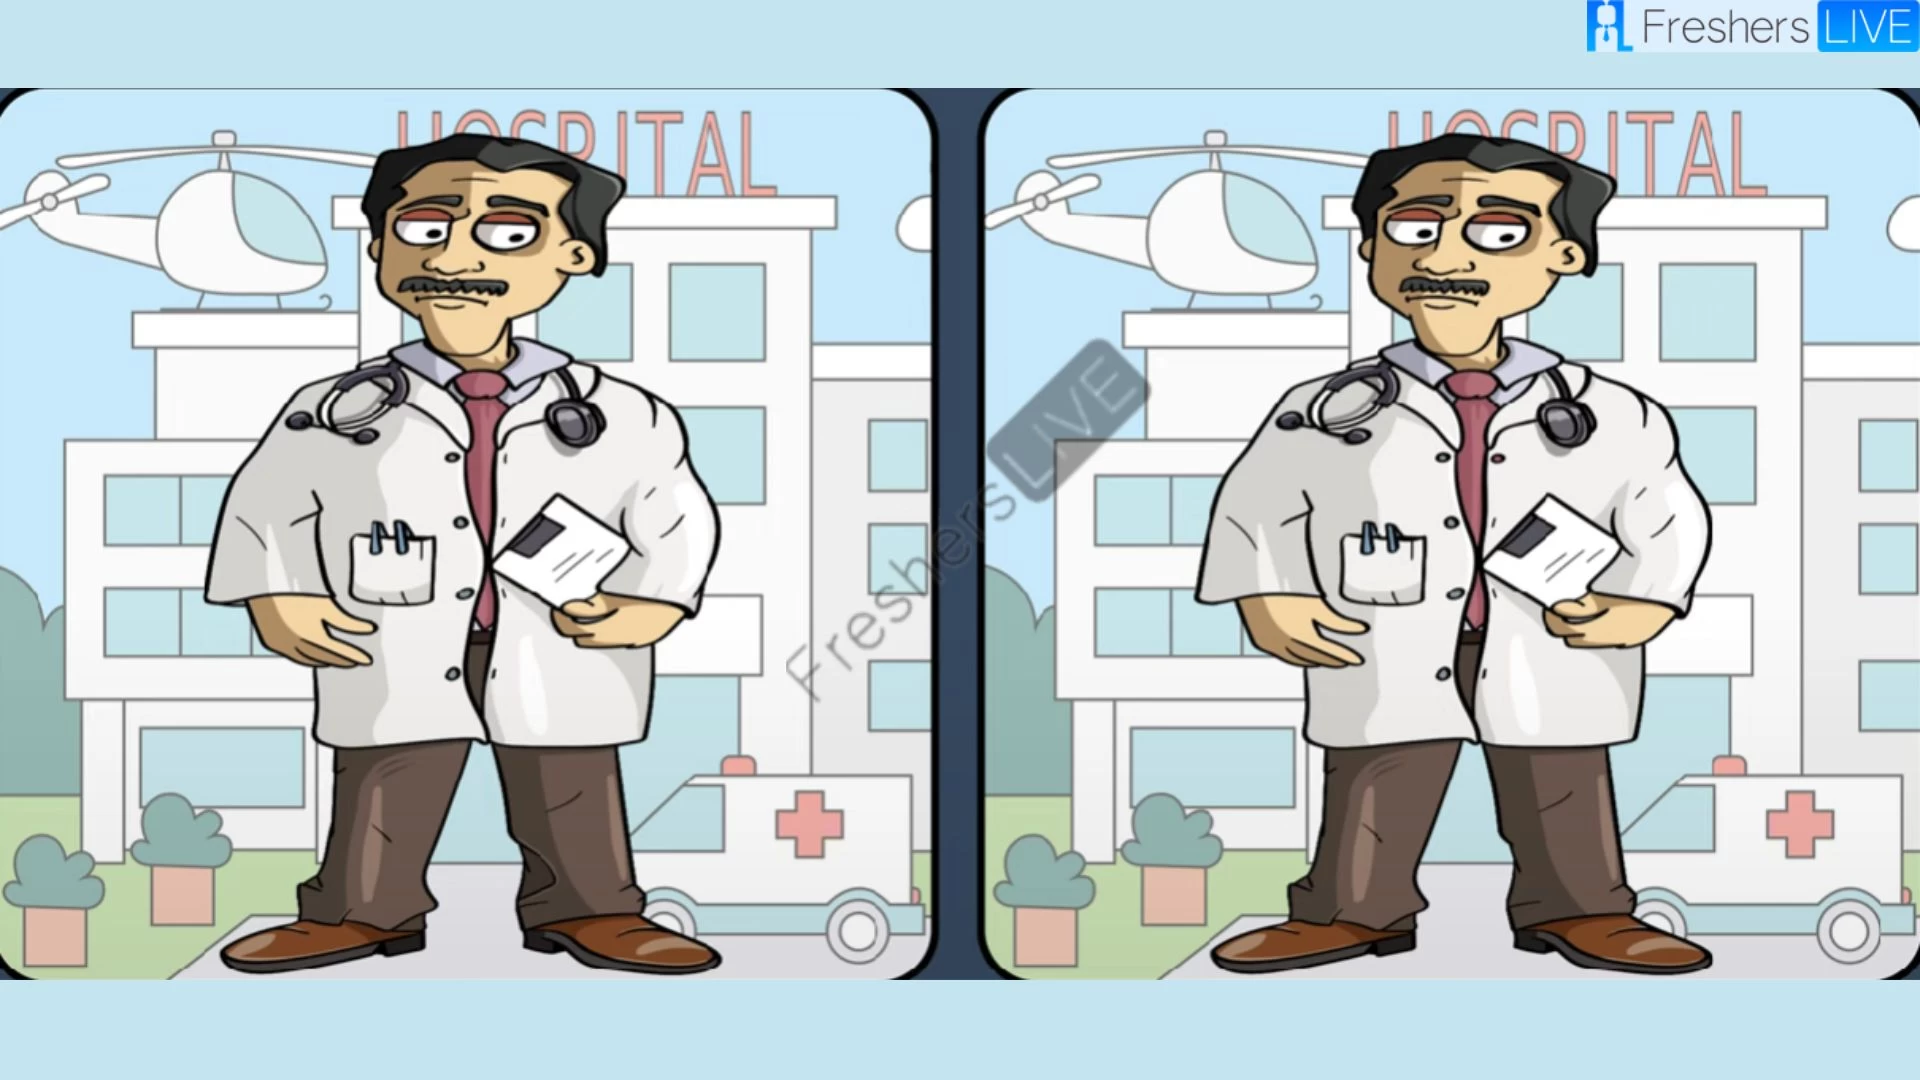 You have 20/20 vision if you can spot the 5 Differences in the Doctor's Pictures